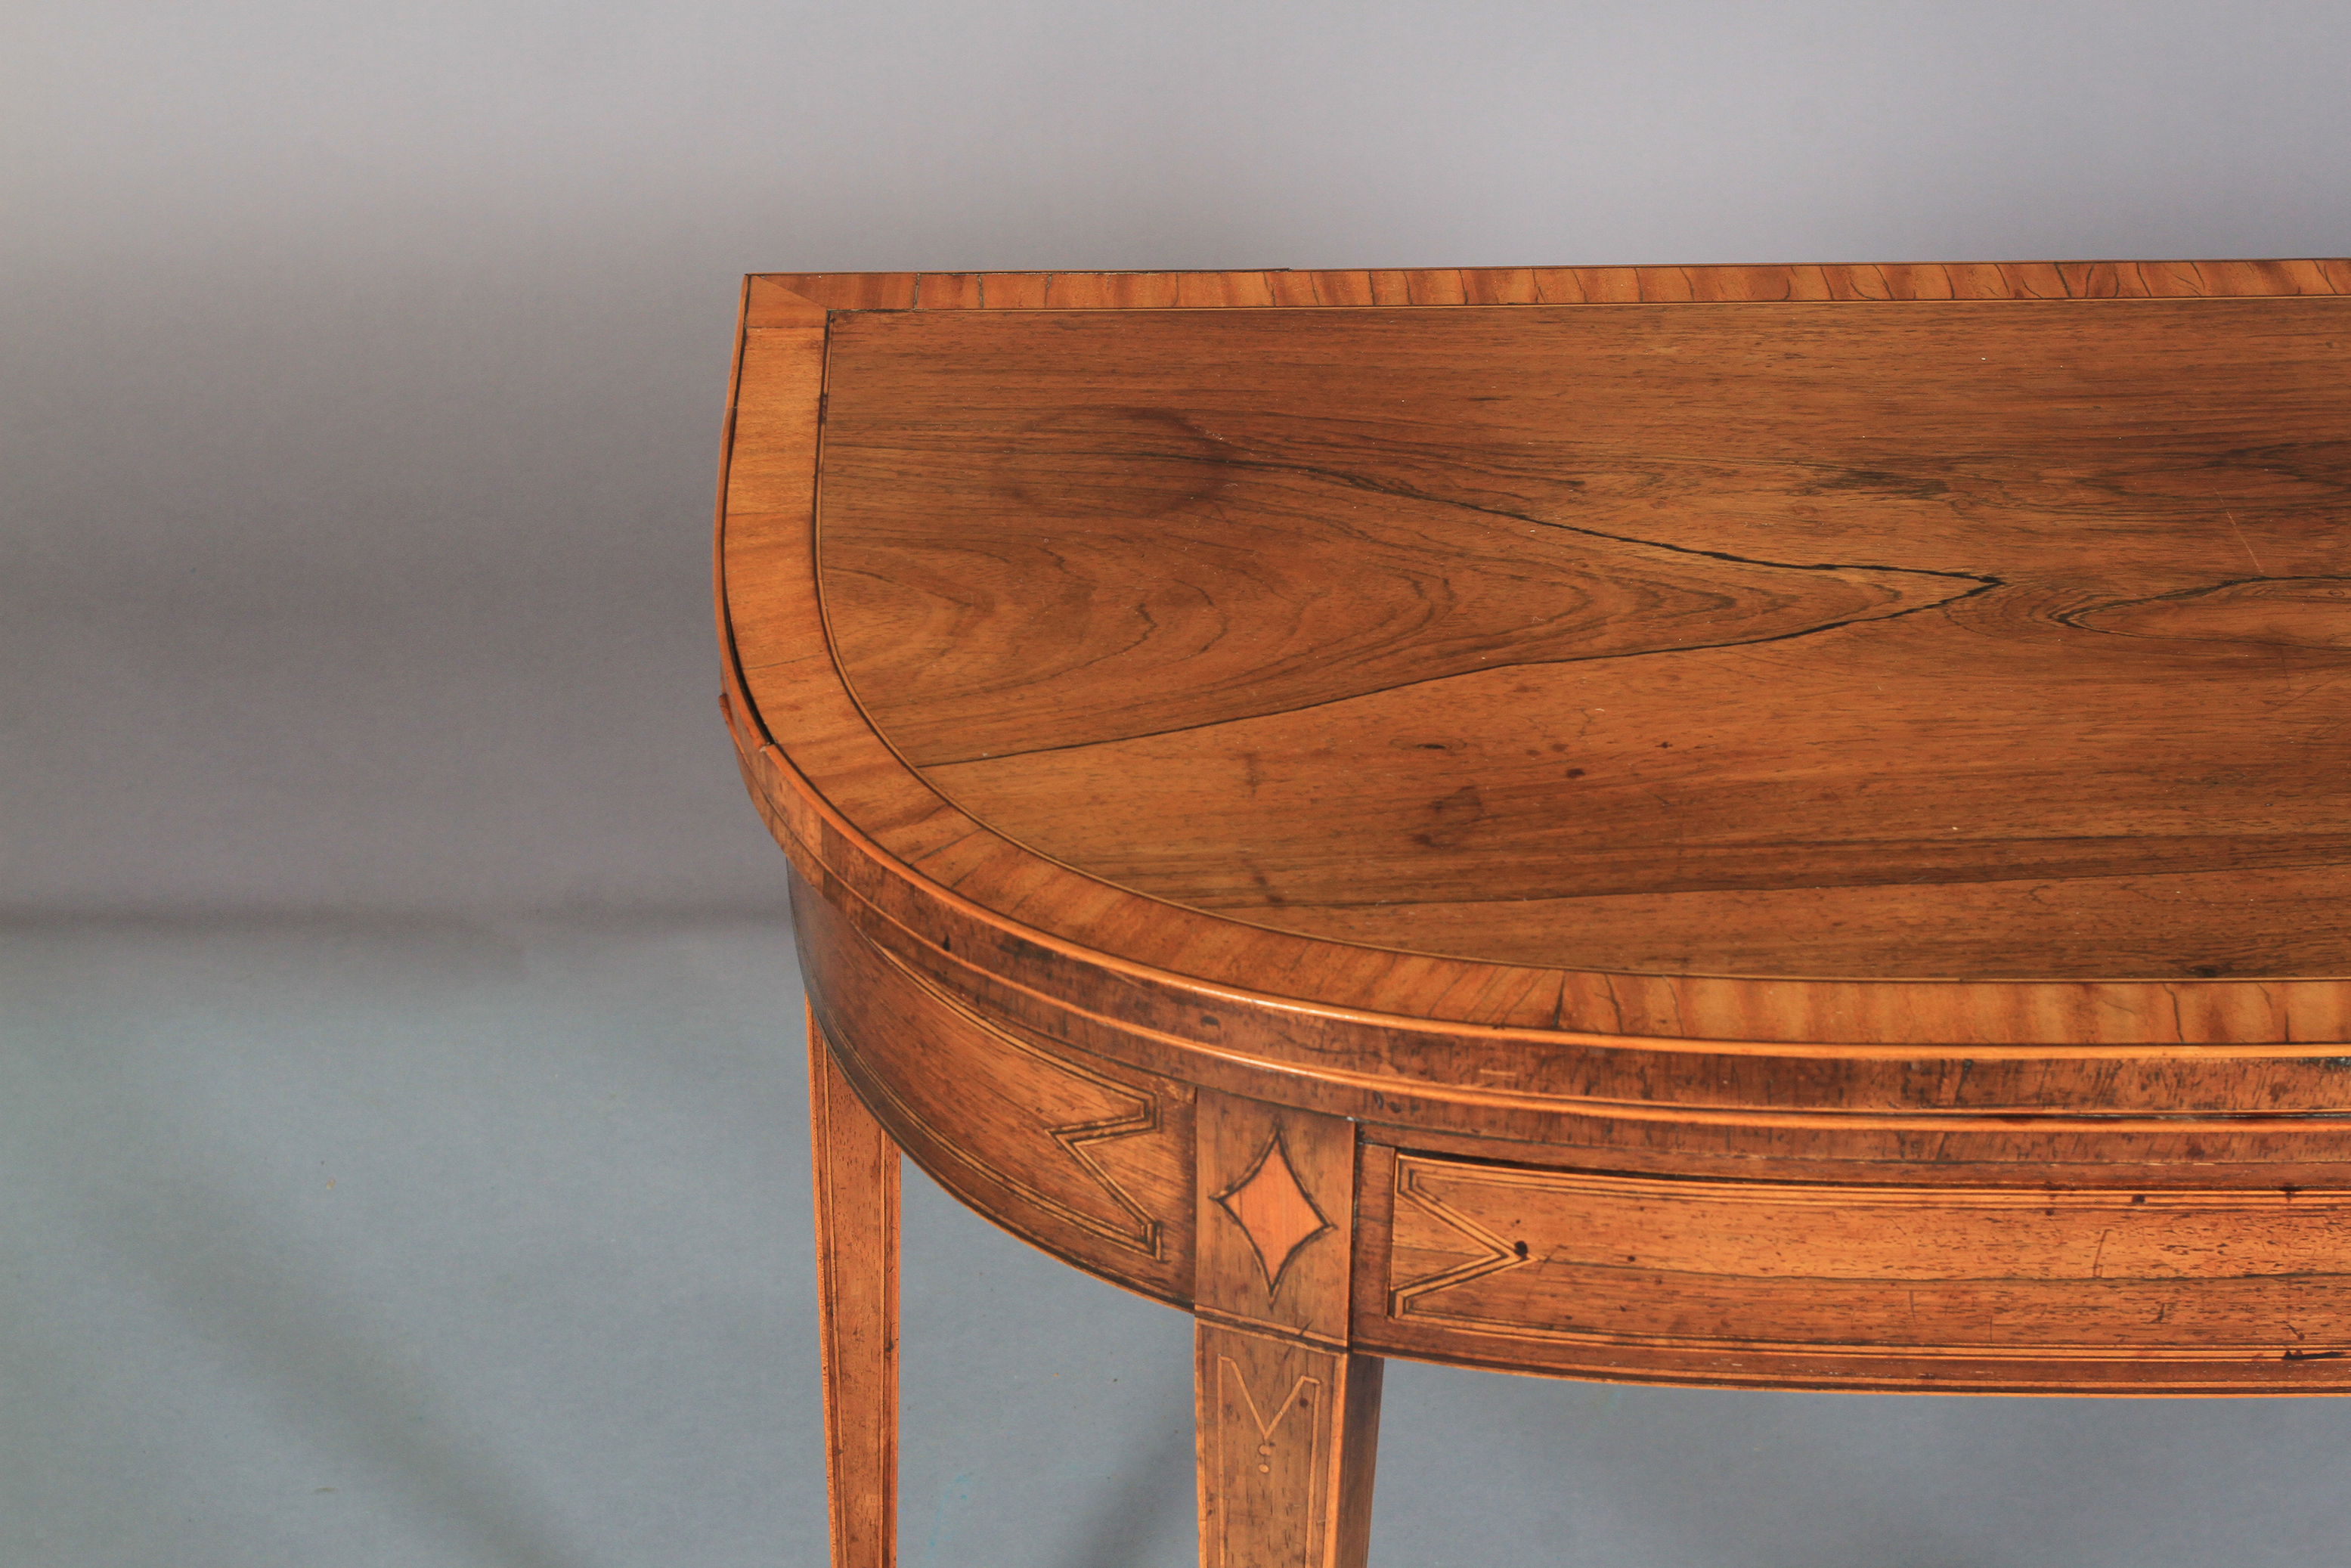 A GEORGE III ROSEWOOD AND SATINWOOD BANDED FOLD-OVER TEA TABLE of 'D' outline, line inlaid with - Image 5 of 6